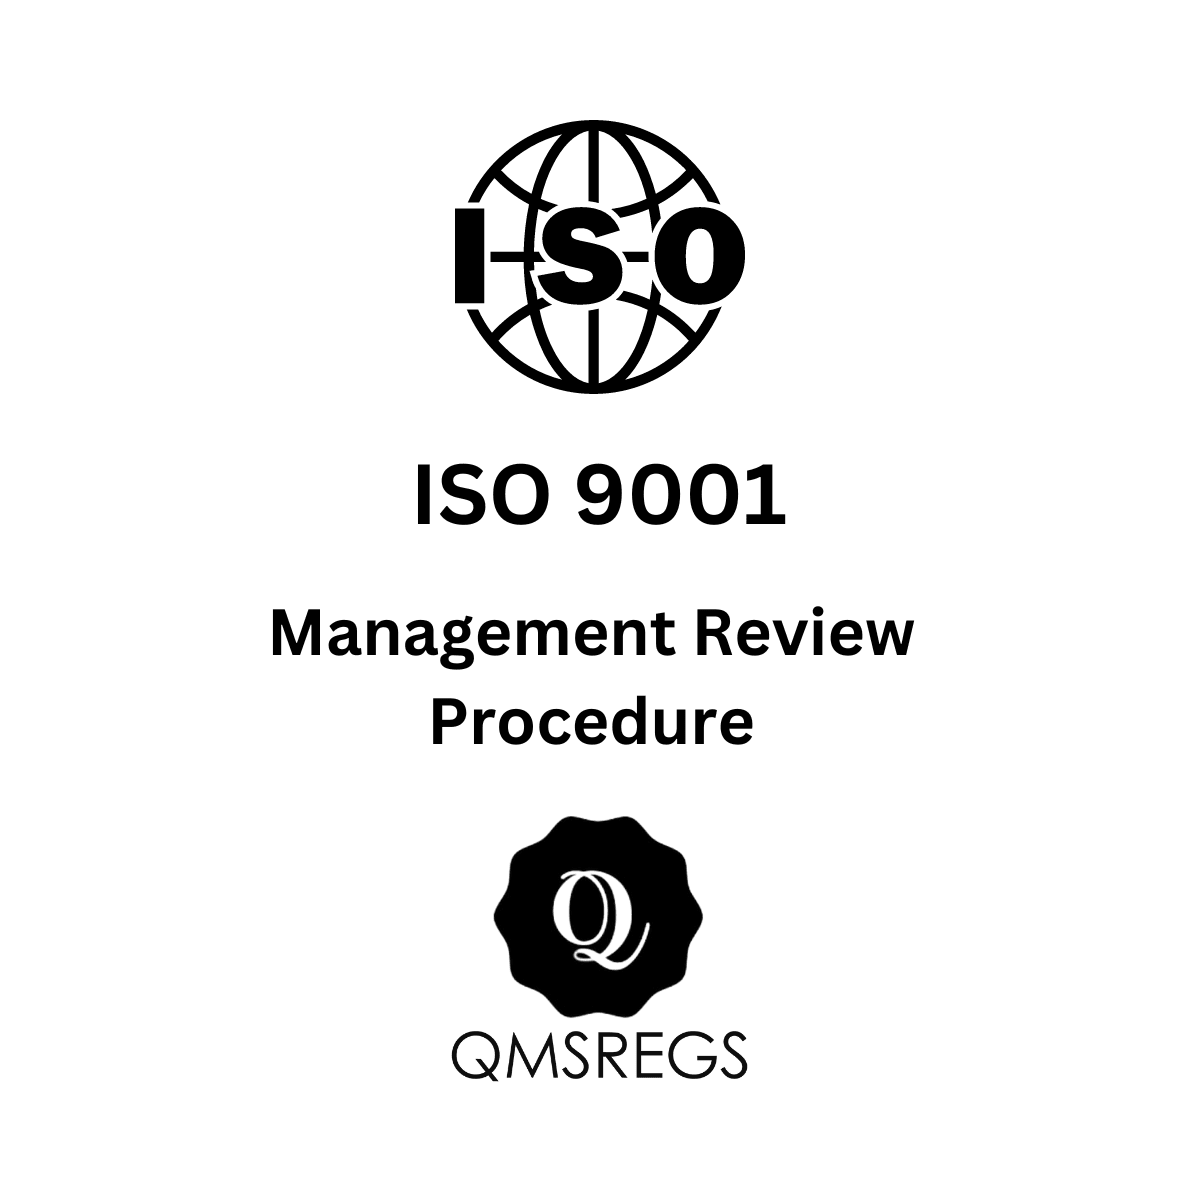 ISO 9001 Management Review Procedure Template